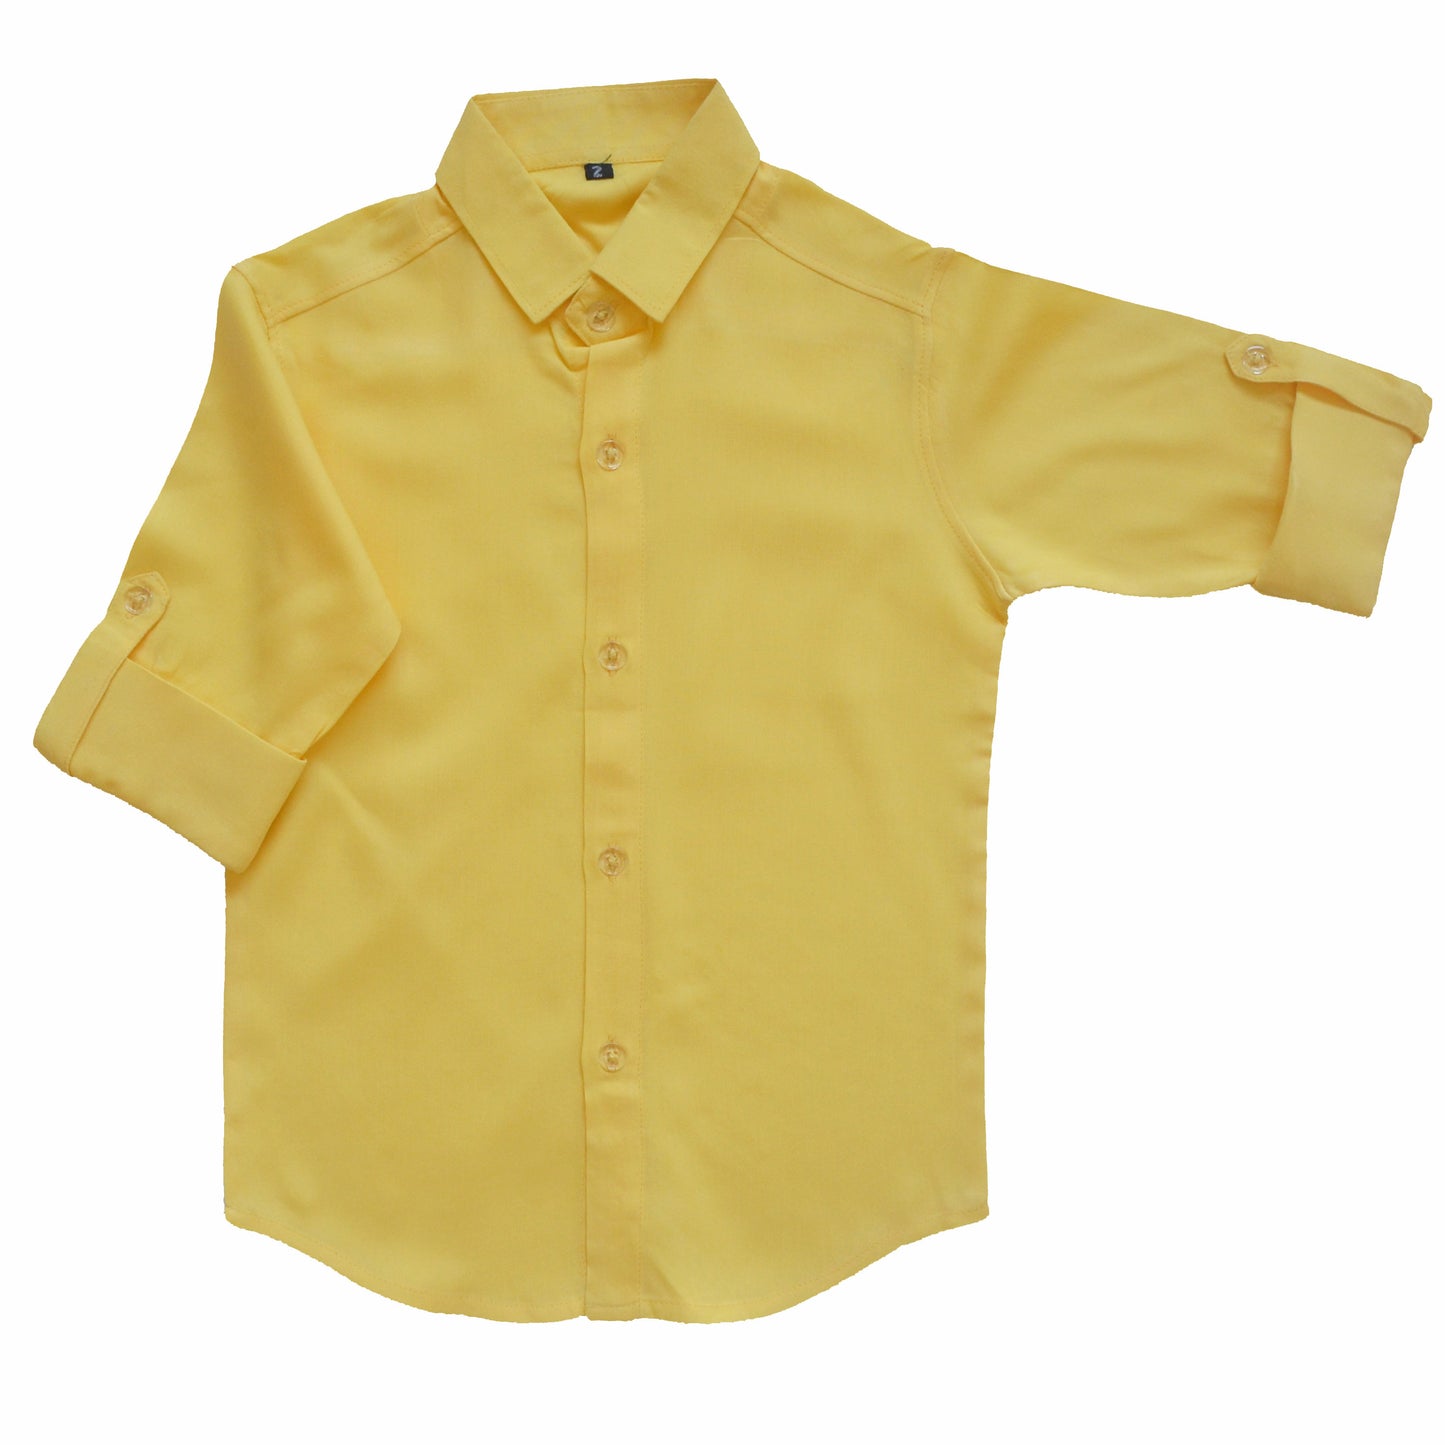 Pastel shade rayon shirts for boys - Combo of 2 - Blue & Yellow